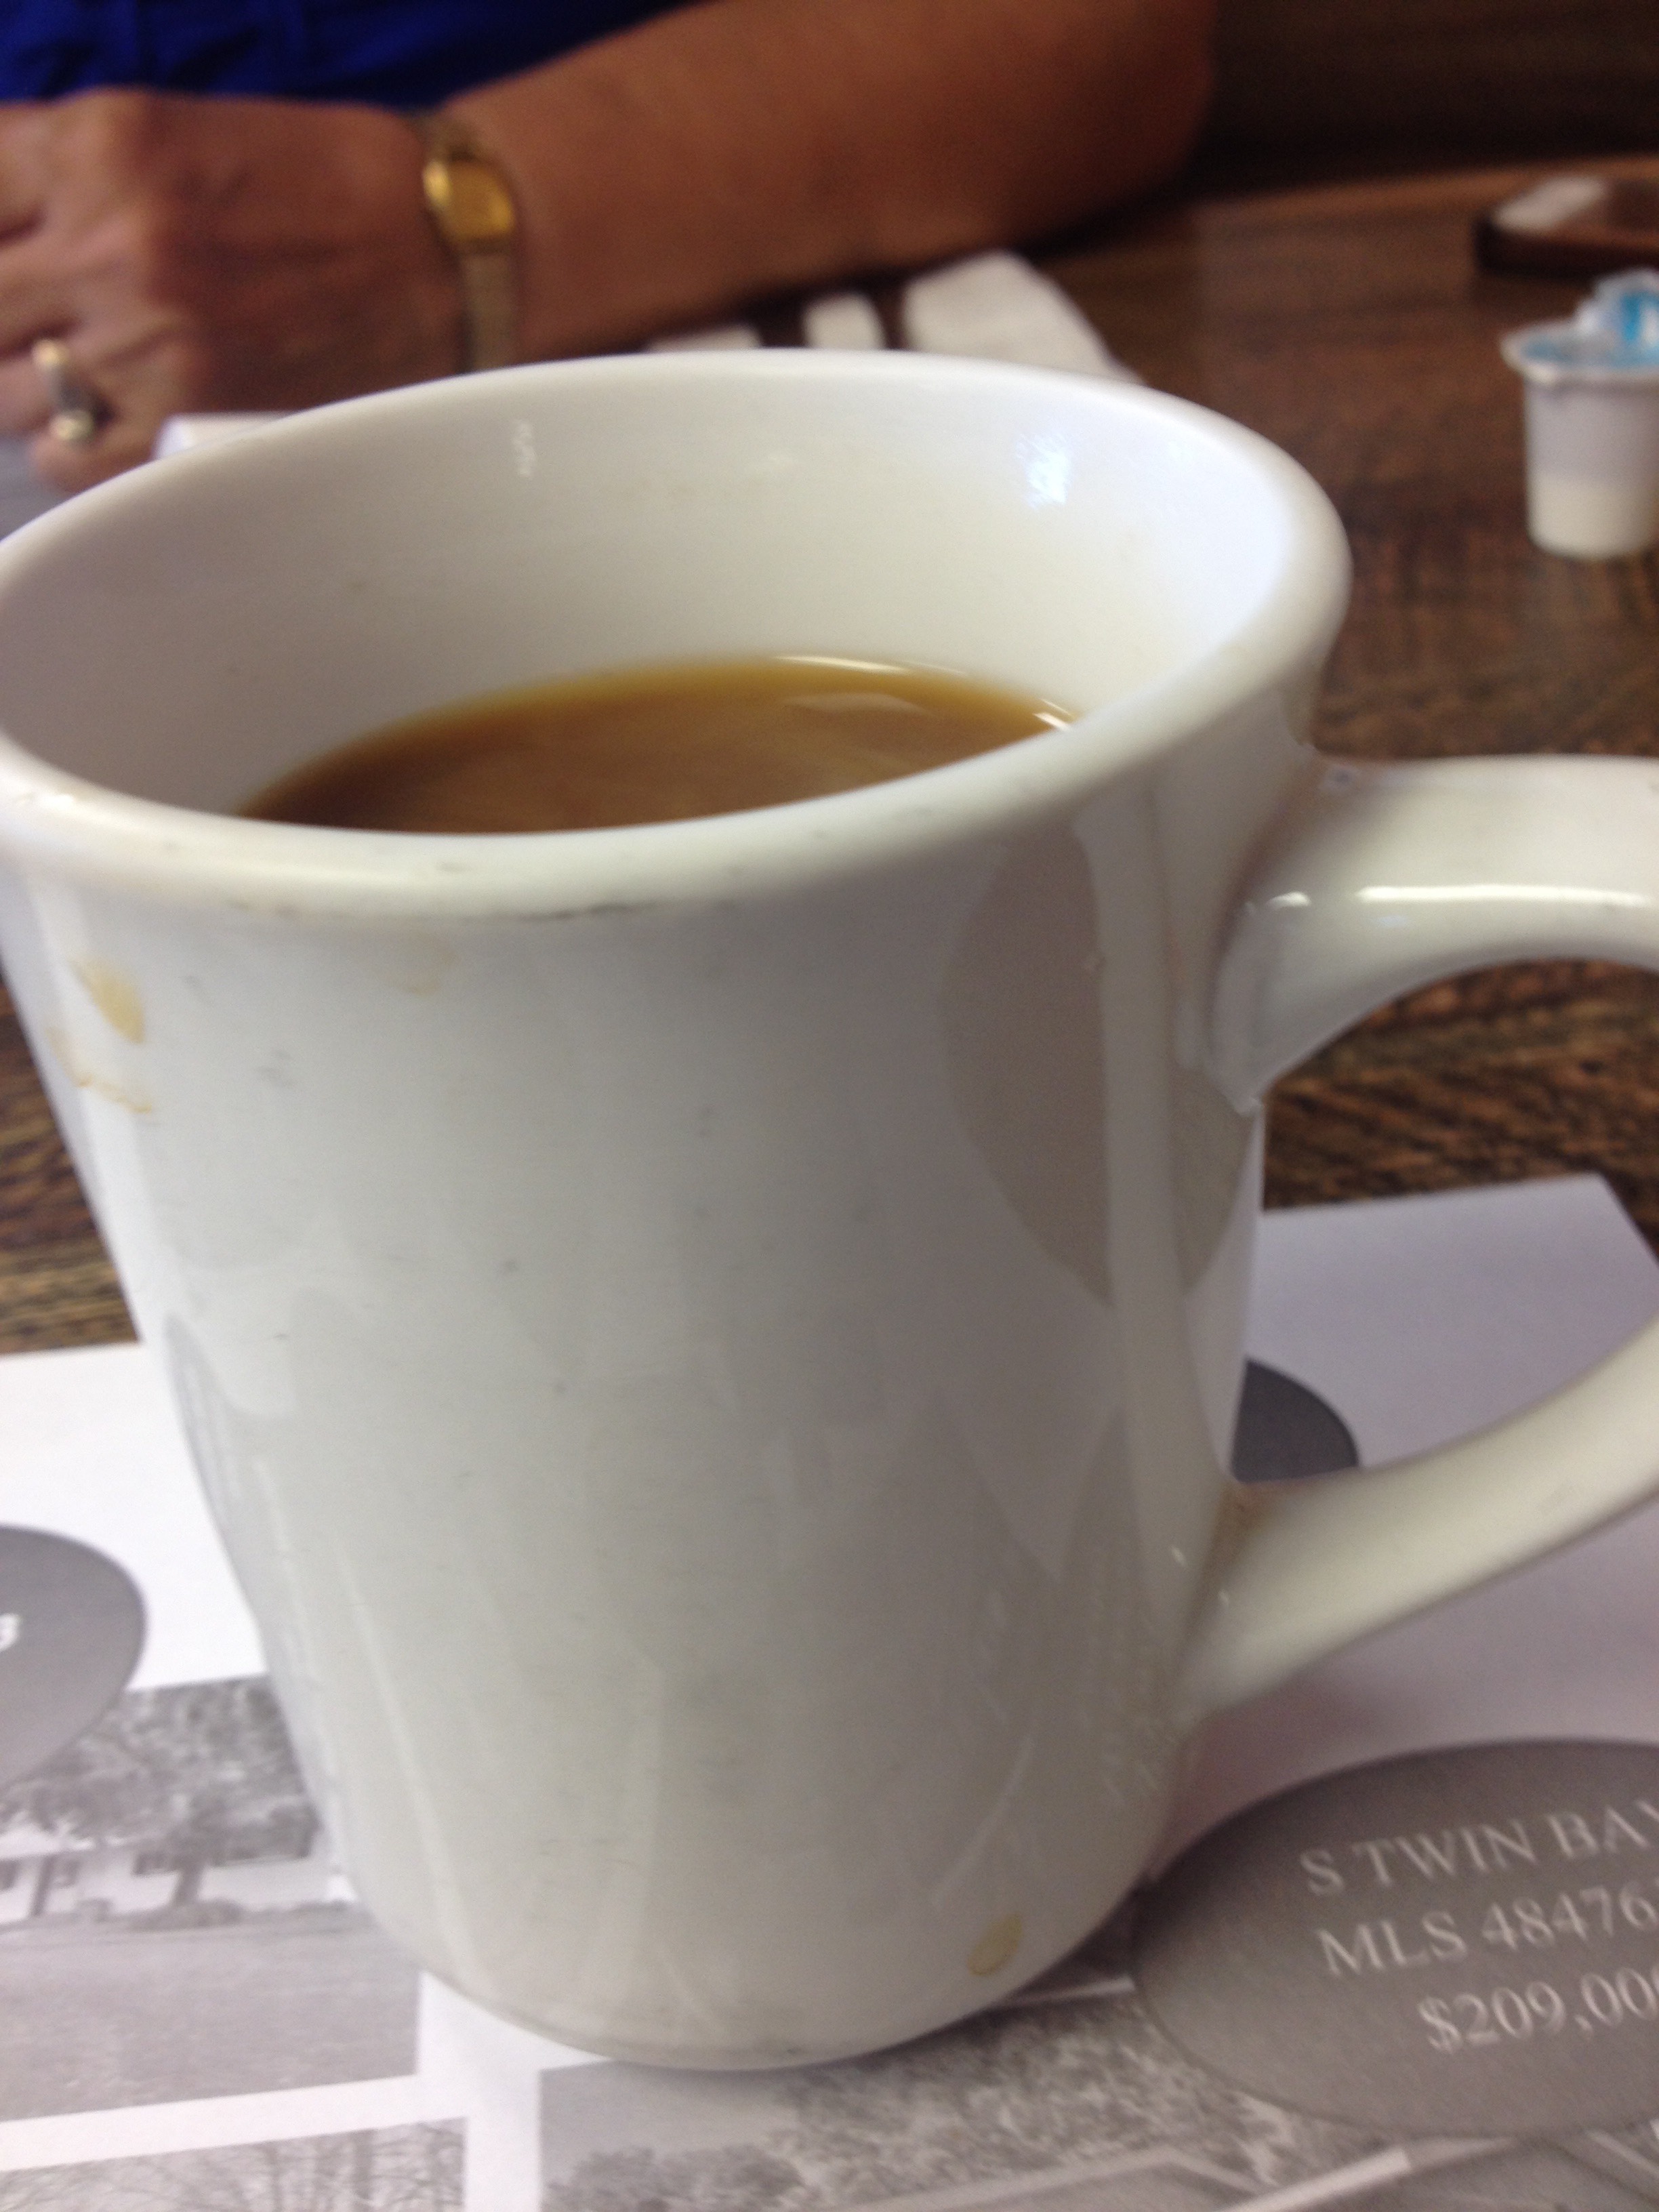 Photo showing a delicious cup of hot, decaf coffee